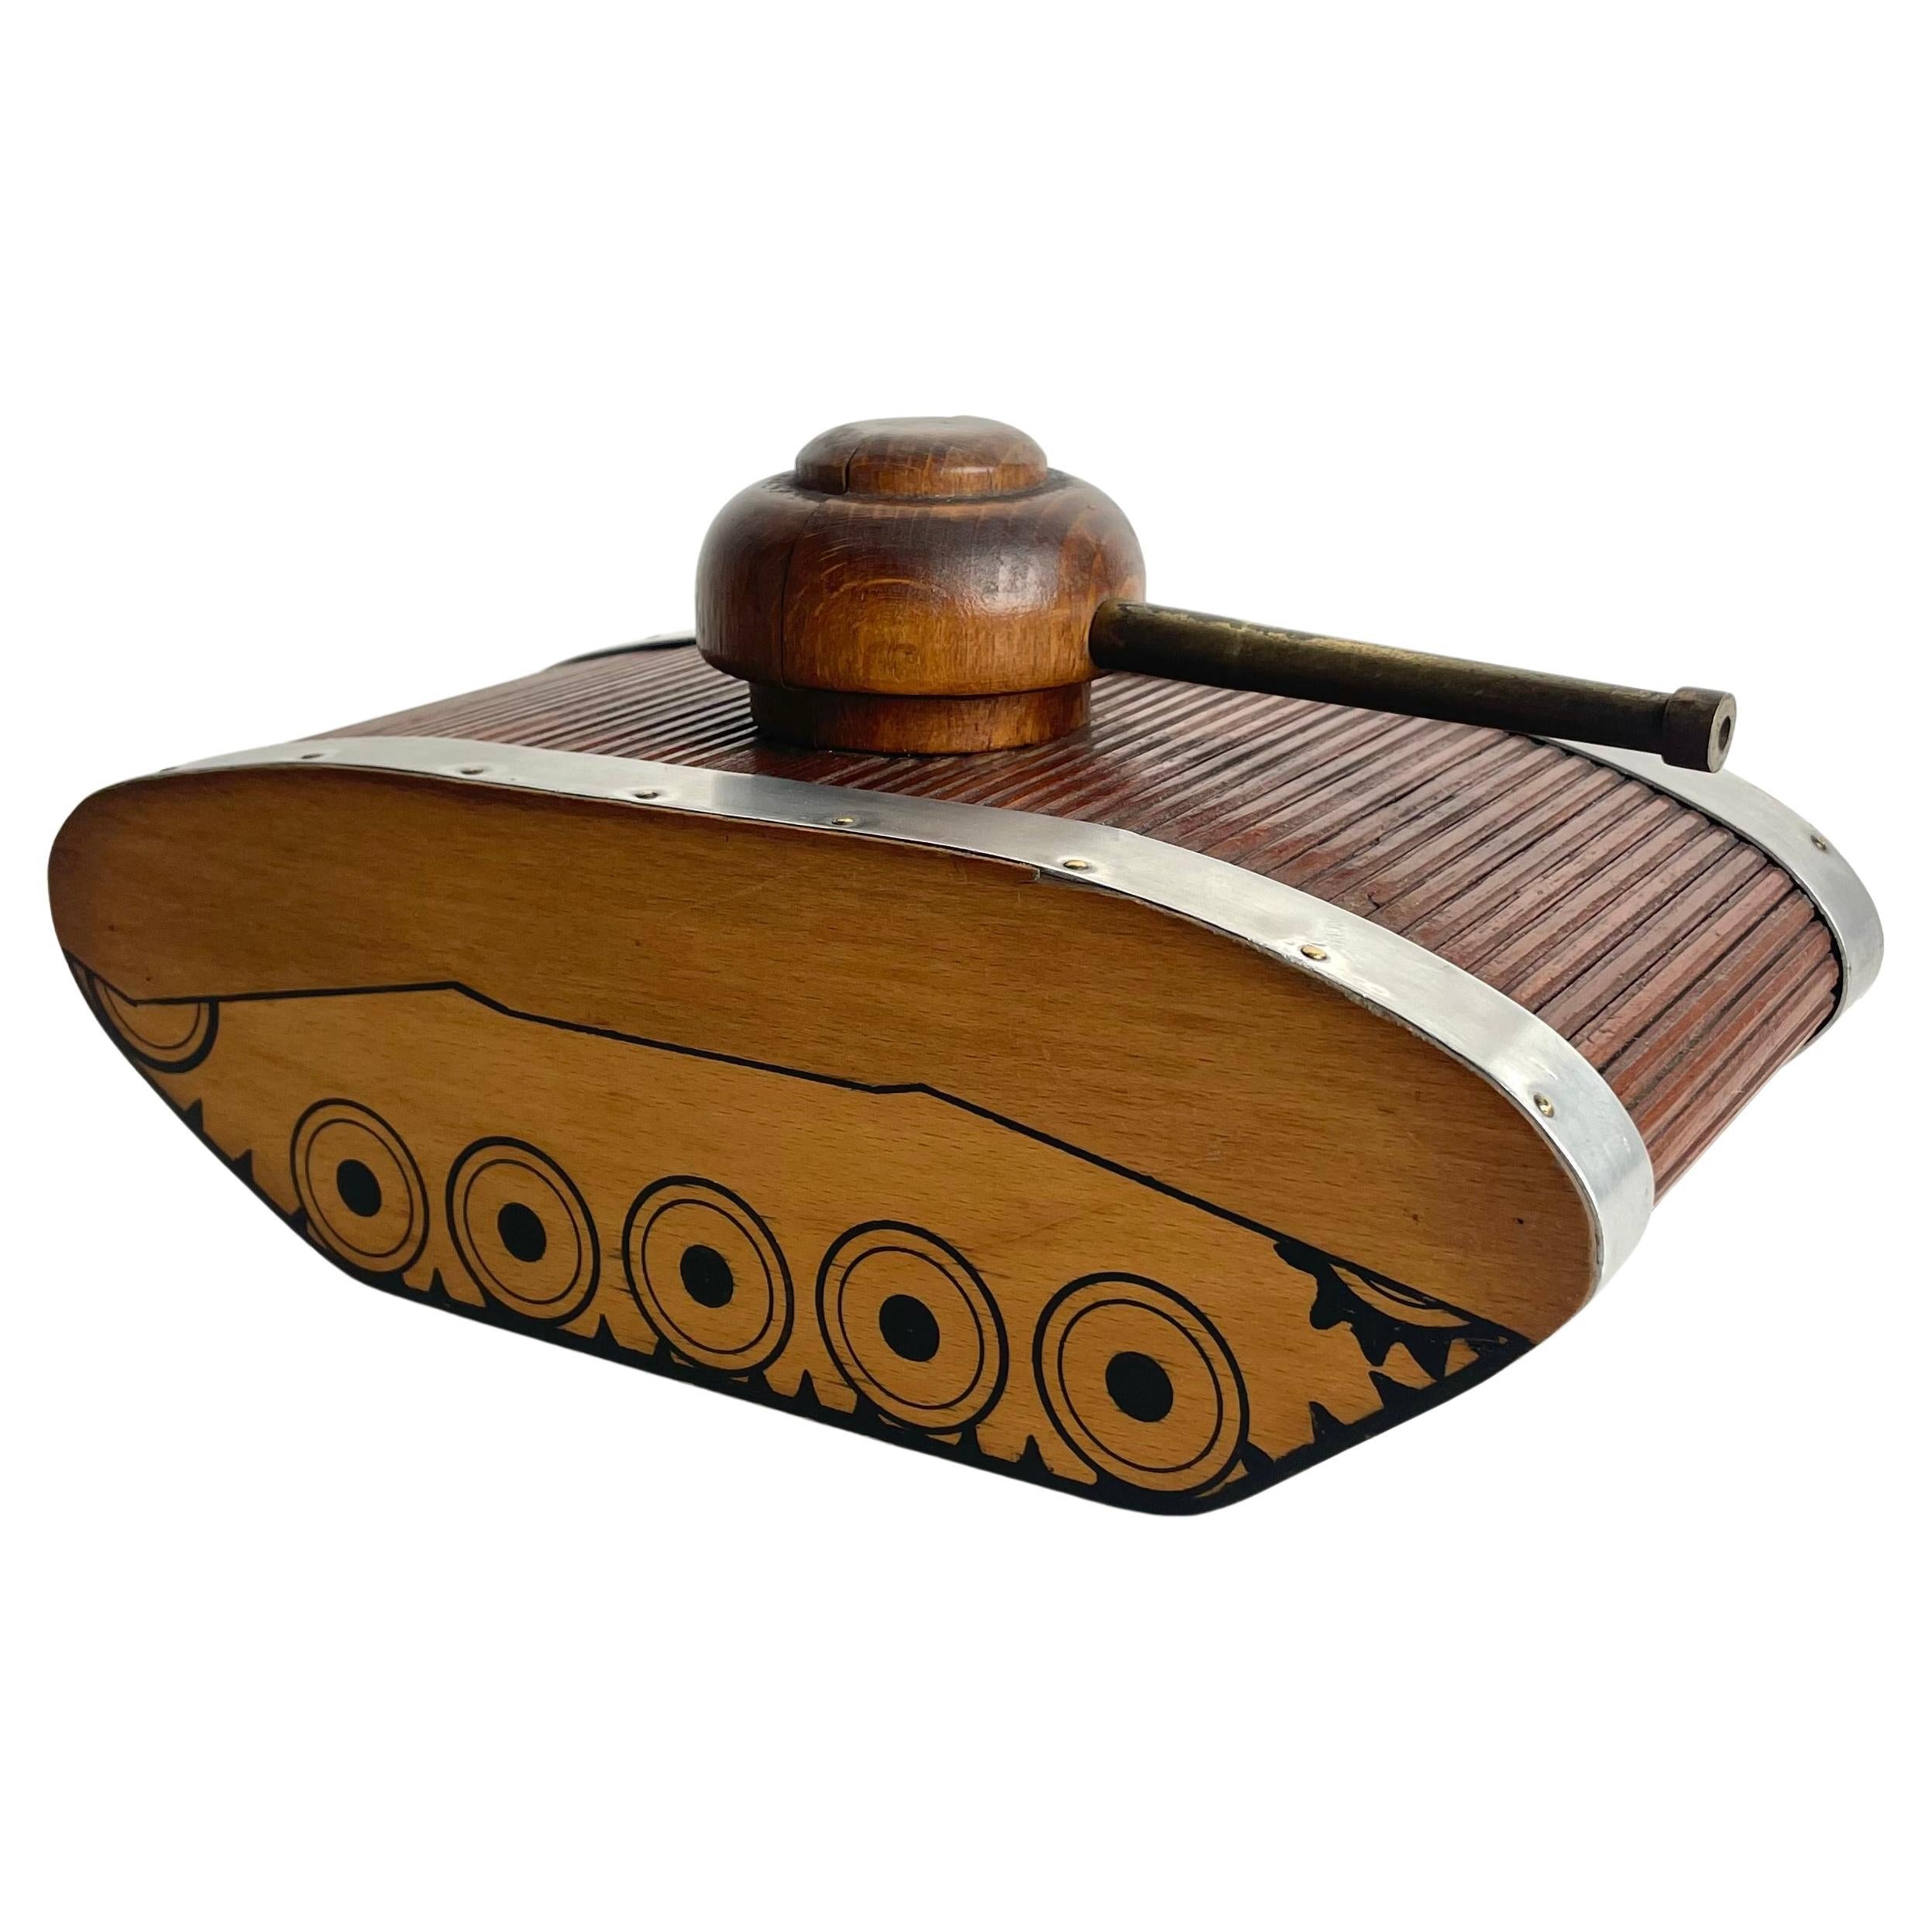 Decorative Cigar or Cigarette Box in the shape of a tank from the 1940s For Sale